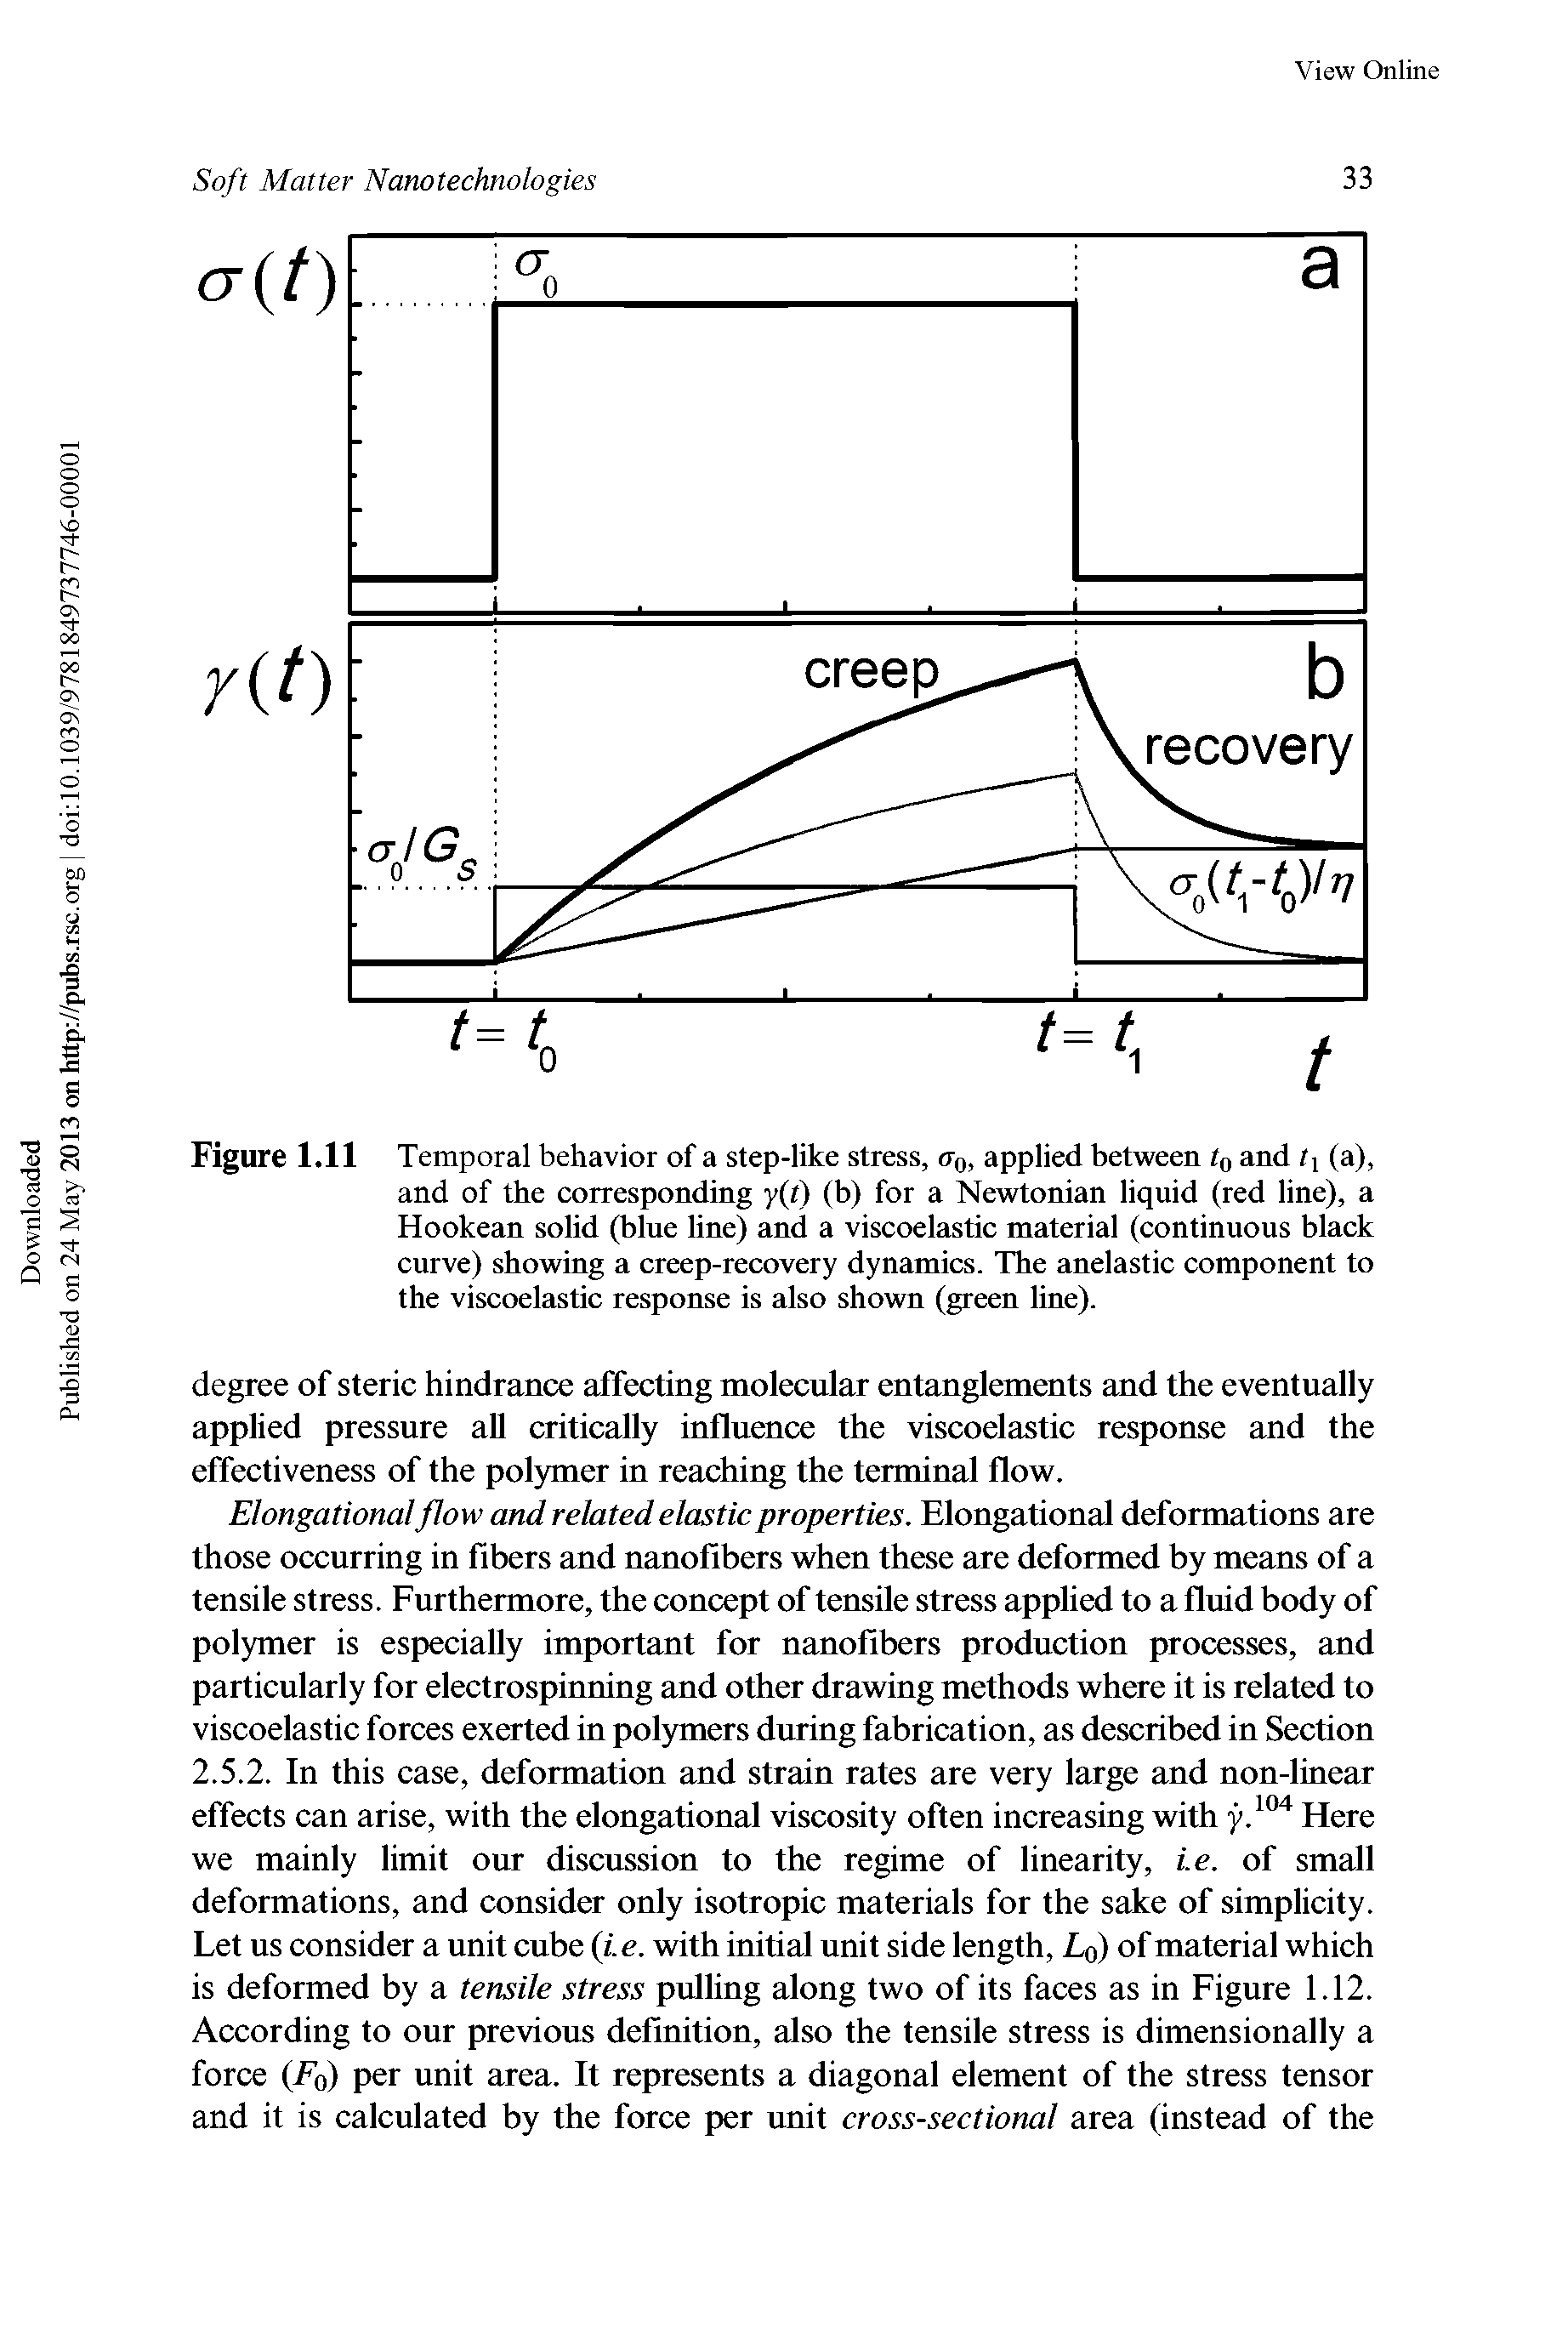 Figure 1.11 Temporal behavior of a step-like stress, (Tq. applied between t and ti (a), and of the corresponding y i) (b) for a Newtonian liquid (red line), a Hookean solid (blue line) and a viscoelastic material (continuous black curve) showing a creep-recovery dynamics. The anelastic component to the viscoelastic response is also shown (green line).